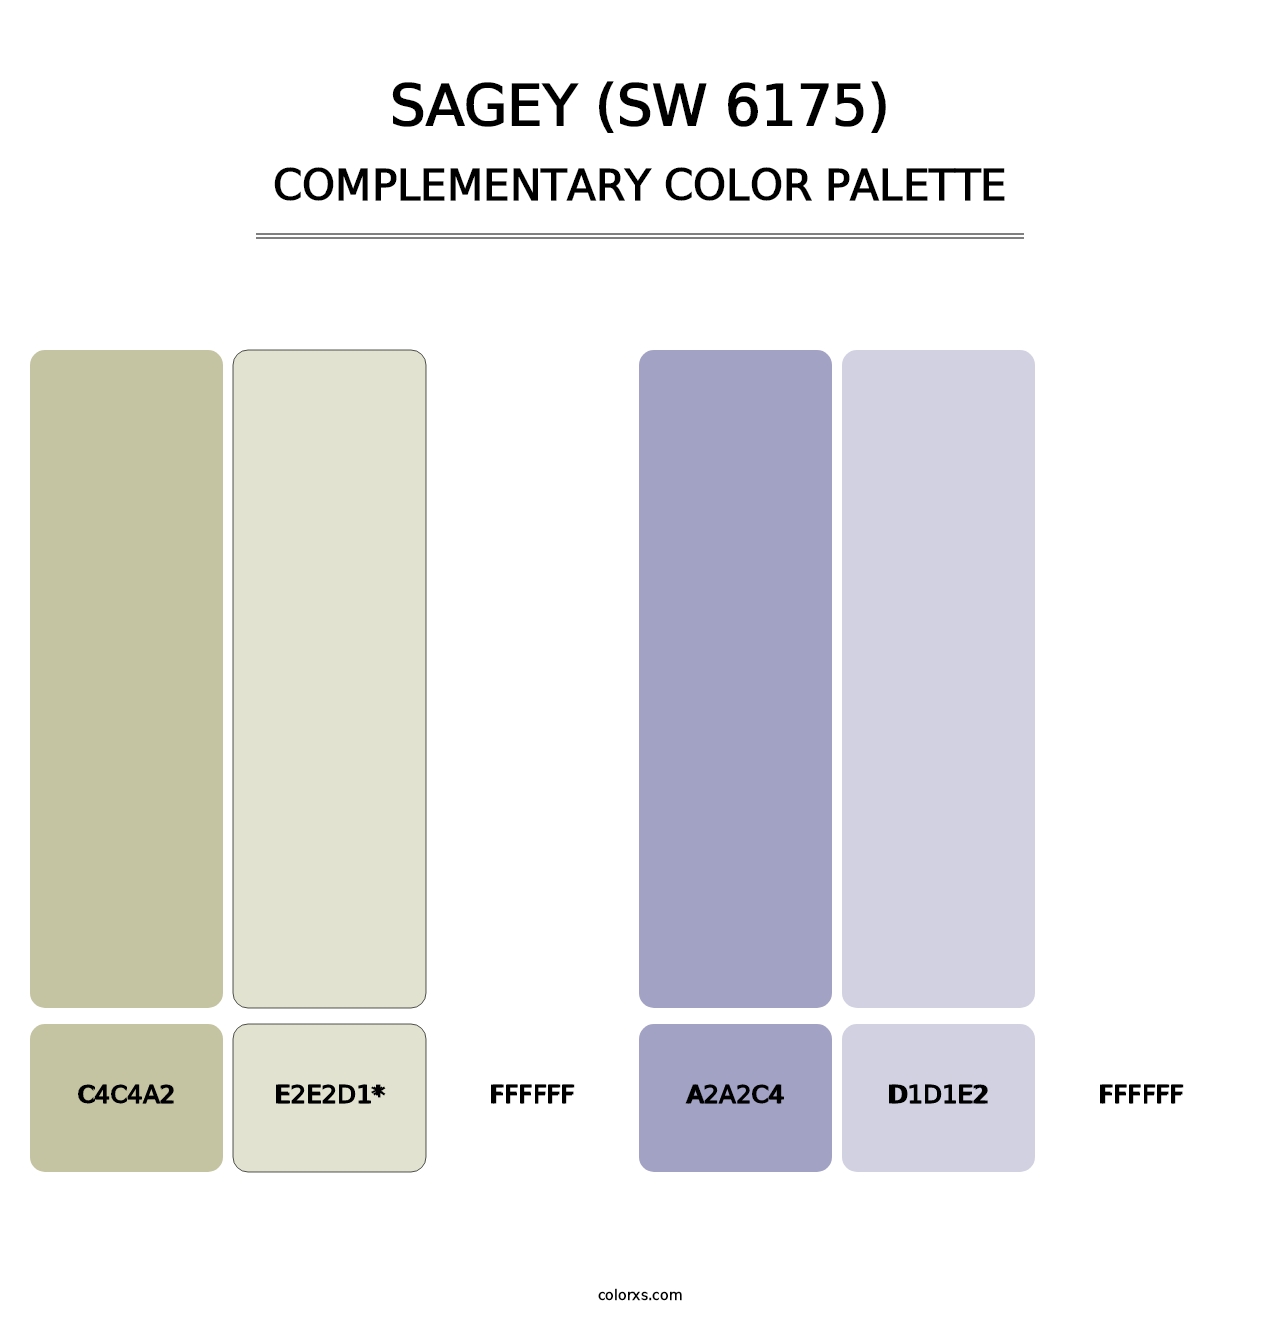 Sagey (SW 6175) - Complementary Color Palette